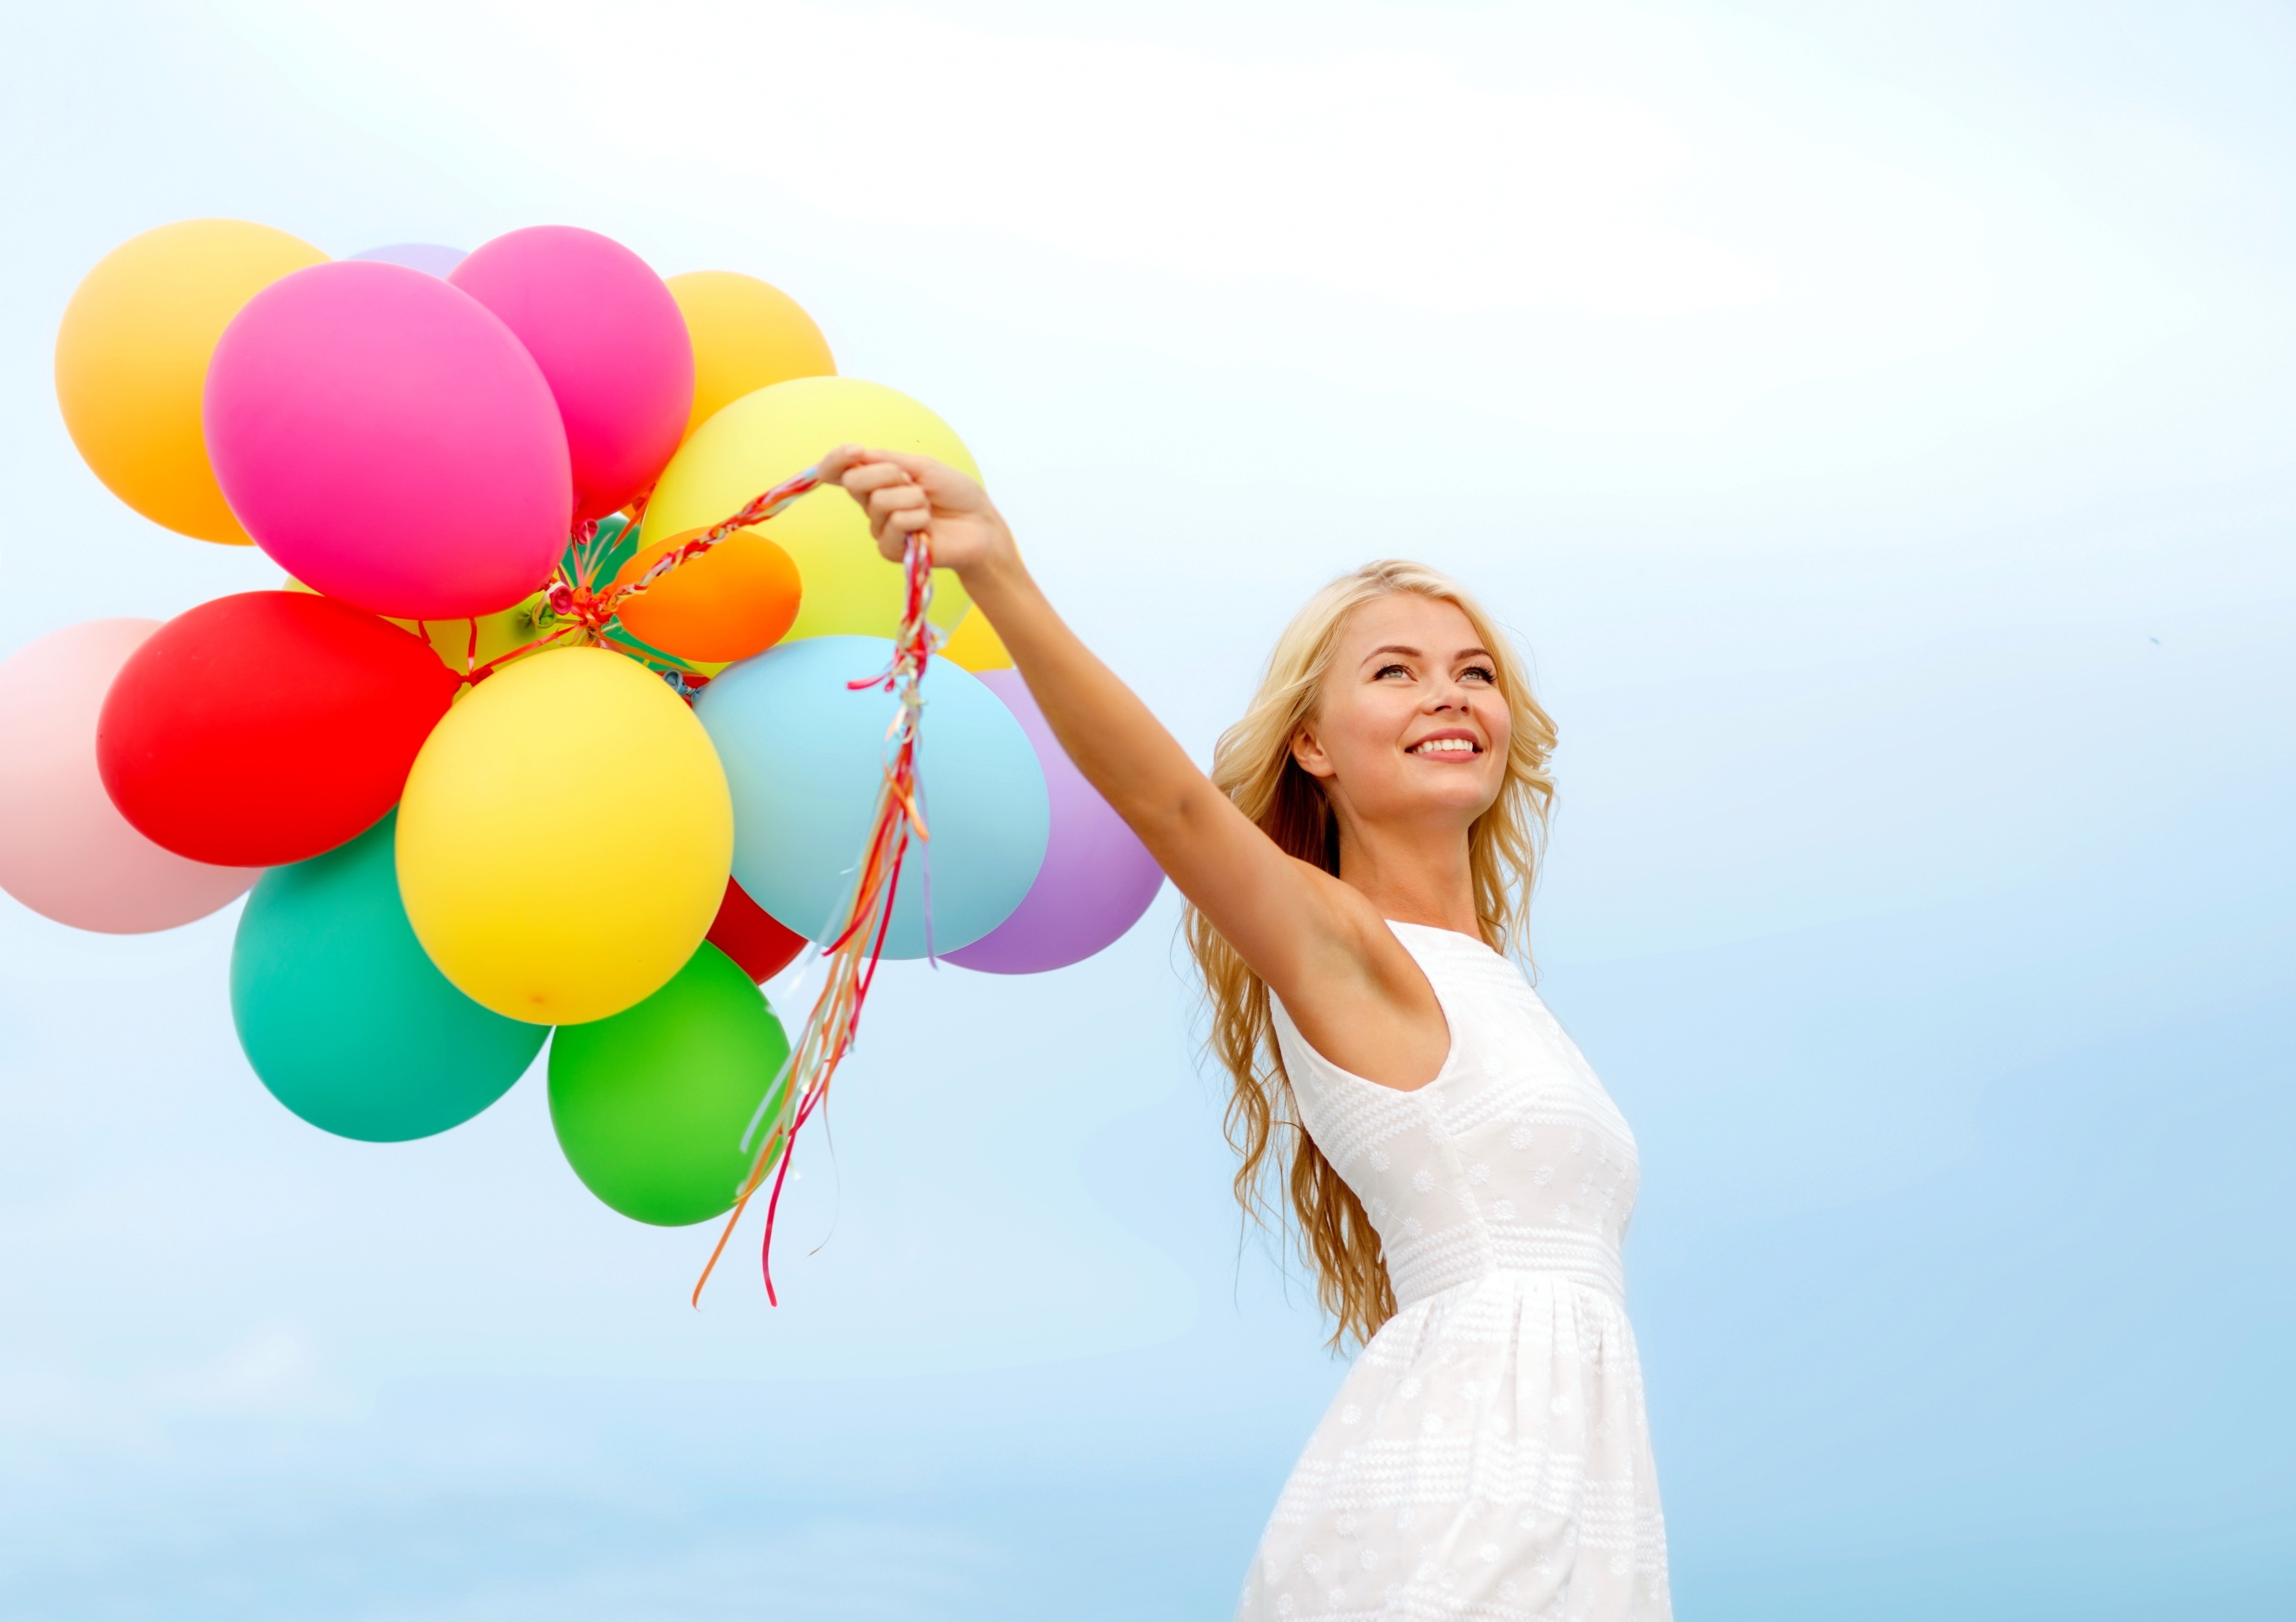 People 4761x3363 colorful balloon women white dress armpits smiling simple background blonde long hair happy dress white clothing looking up model